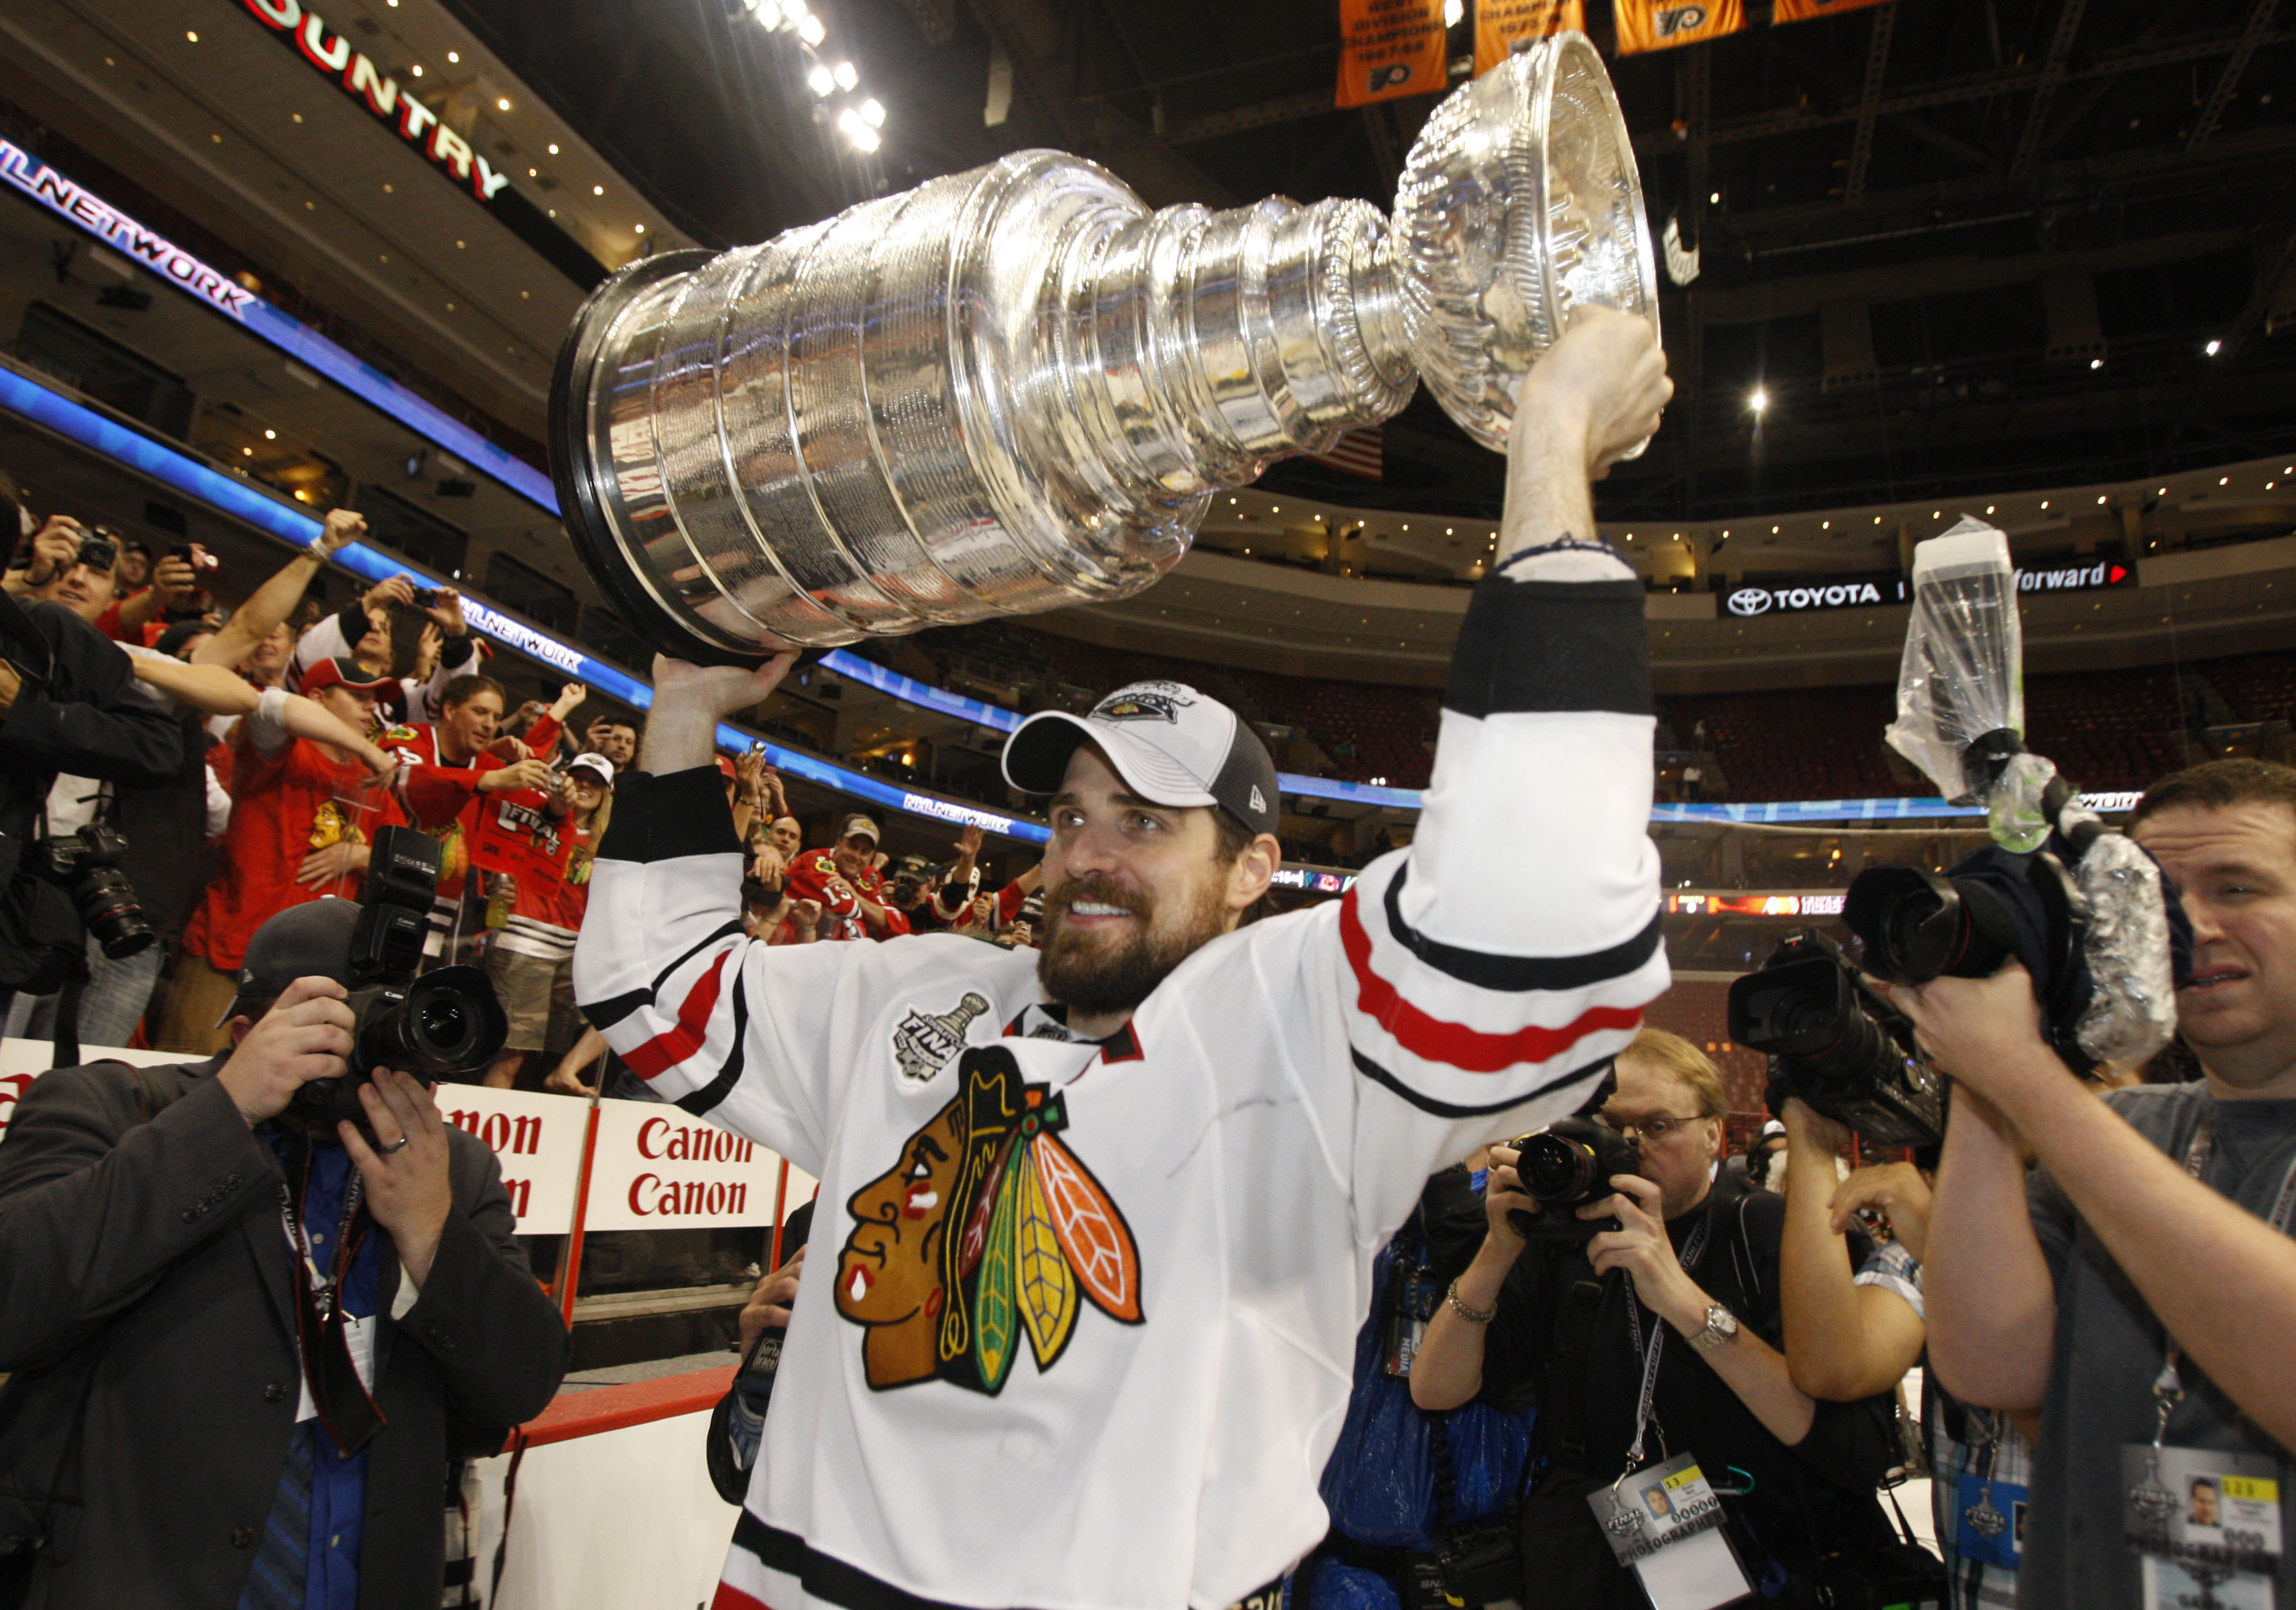 NHL -- Dallas Stars expect Patrick Sharp to be important piece of